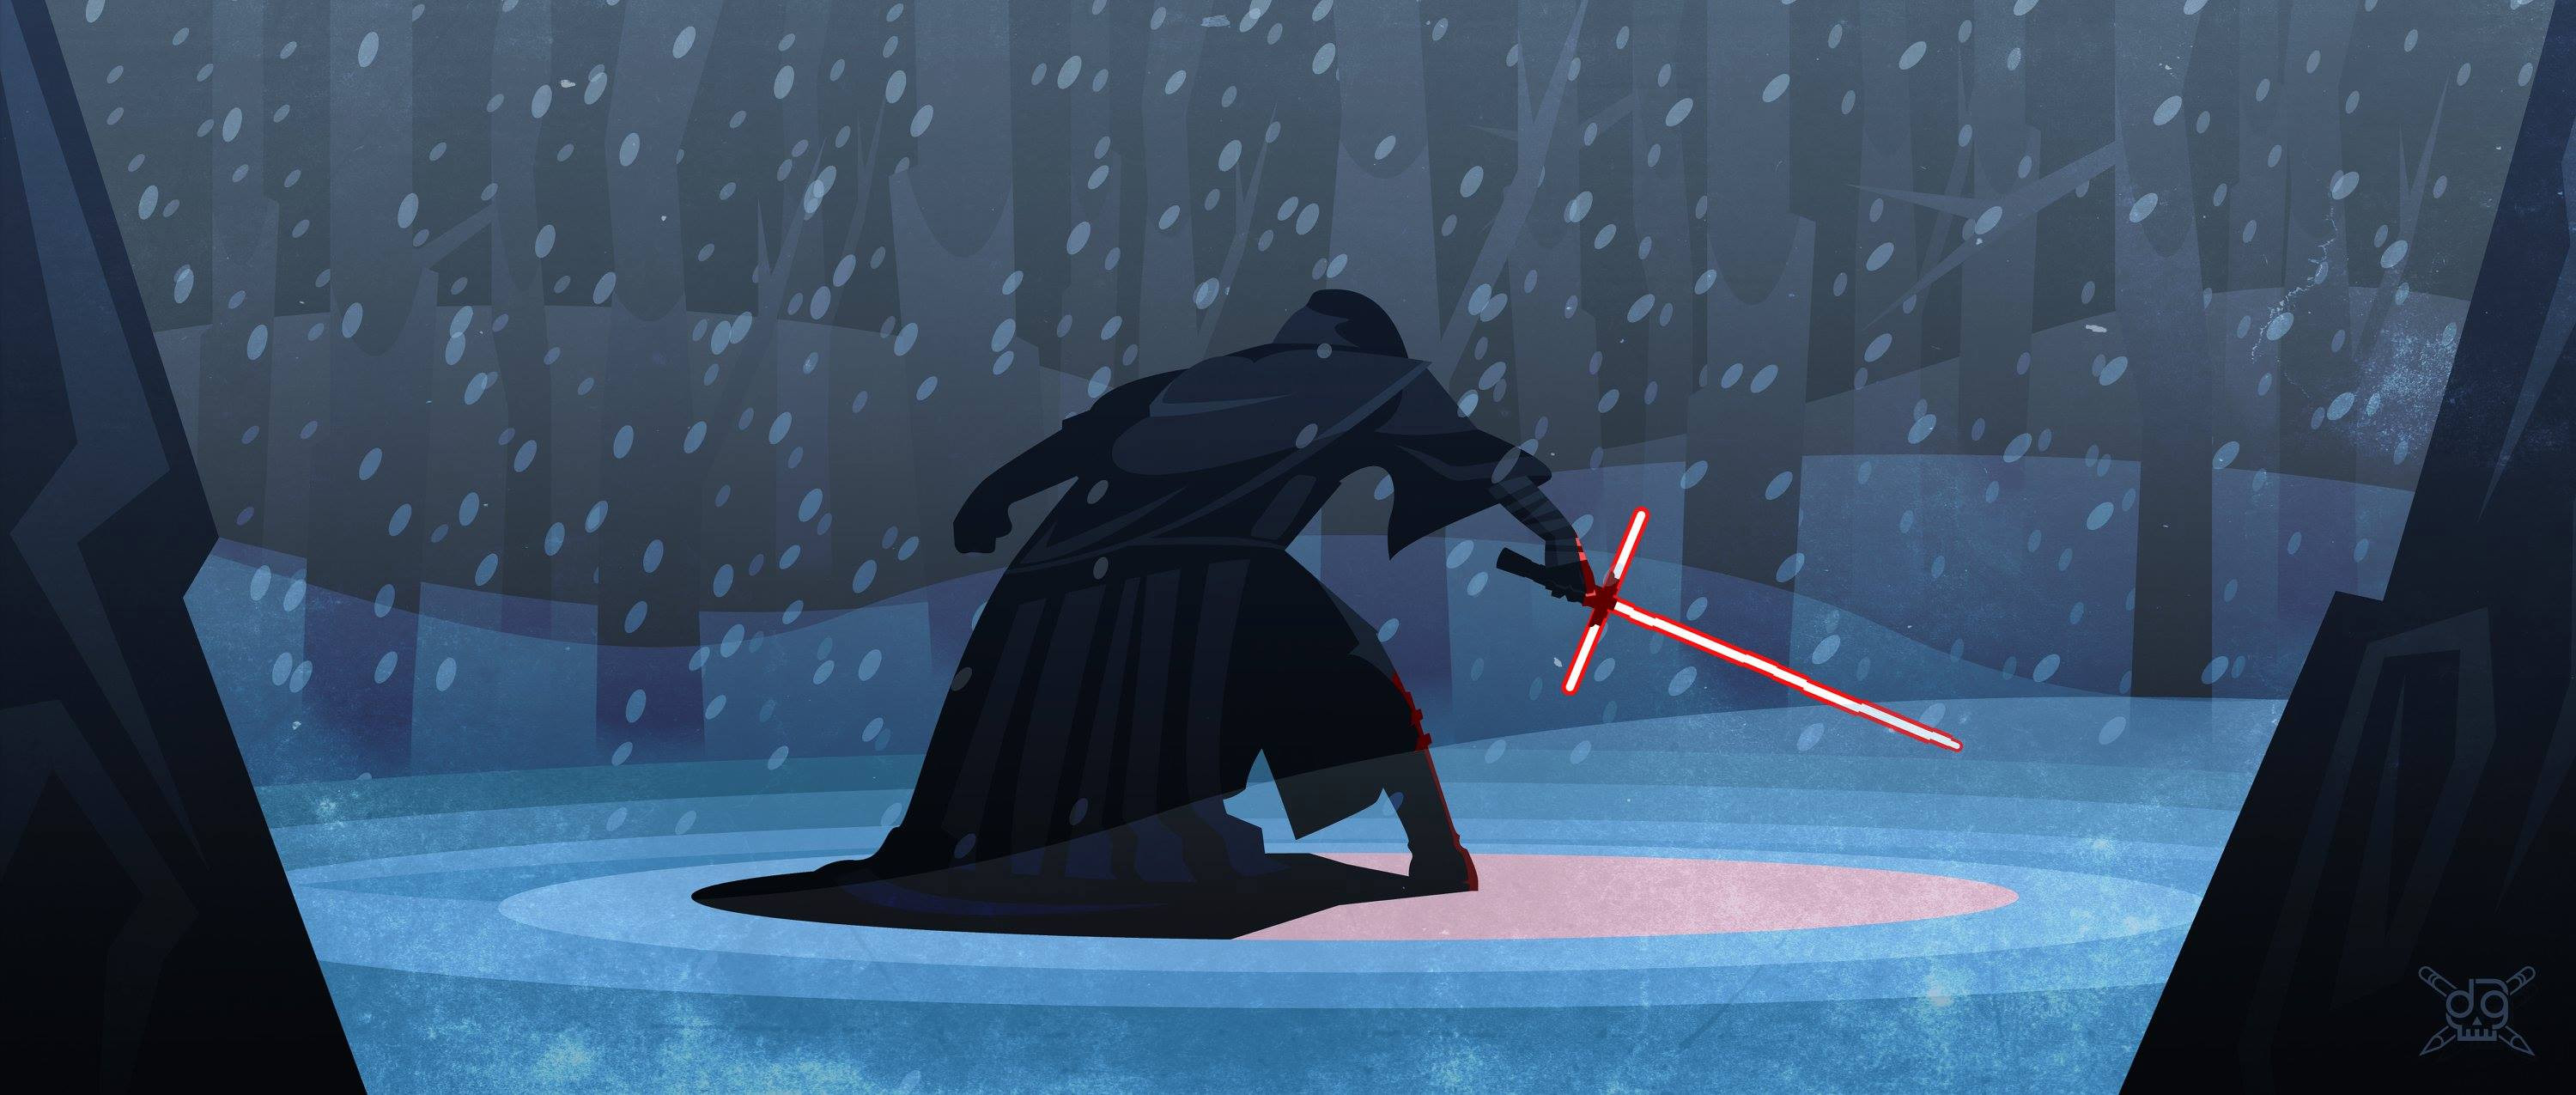 Kylo Ren in the forest vector illustration